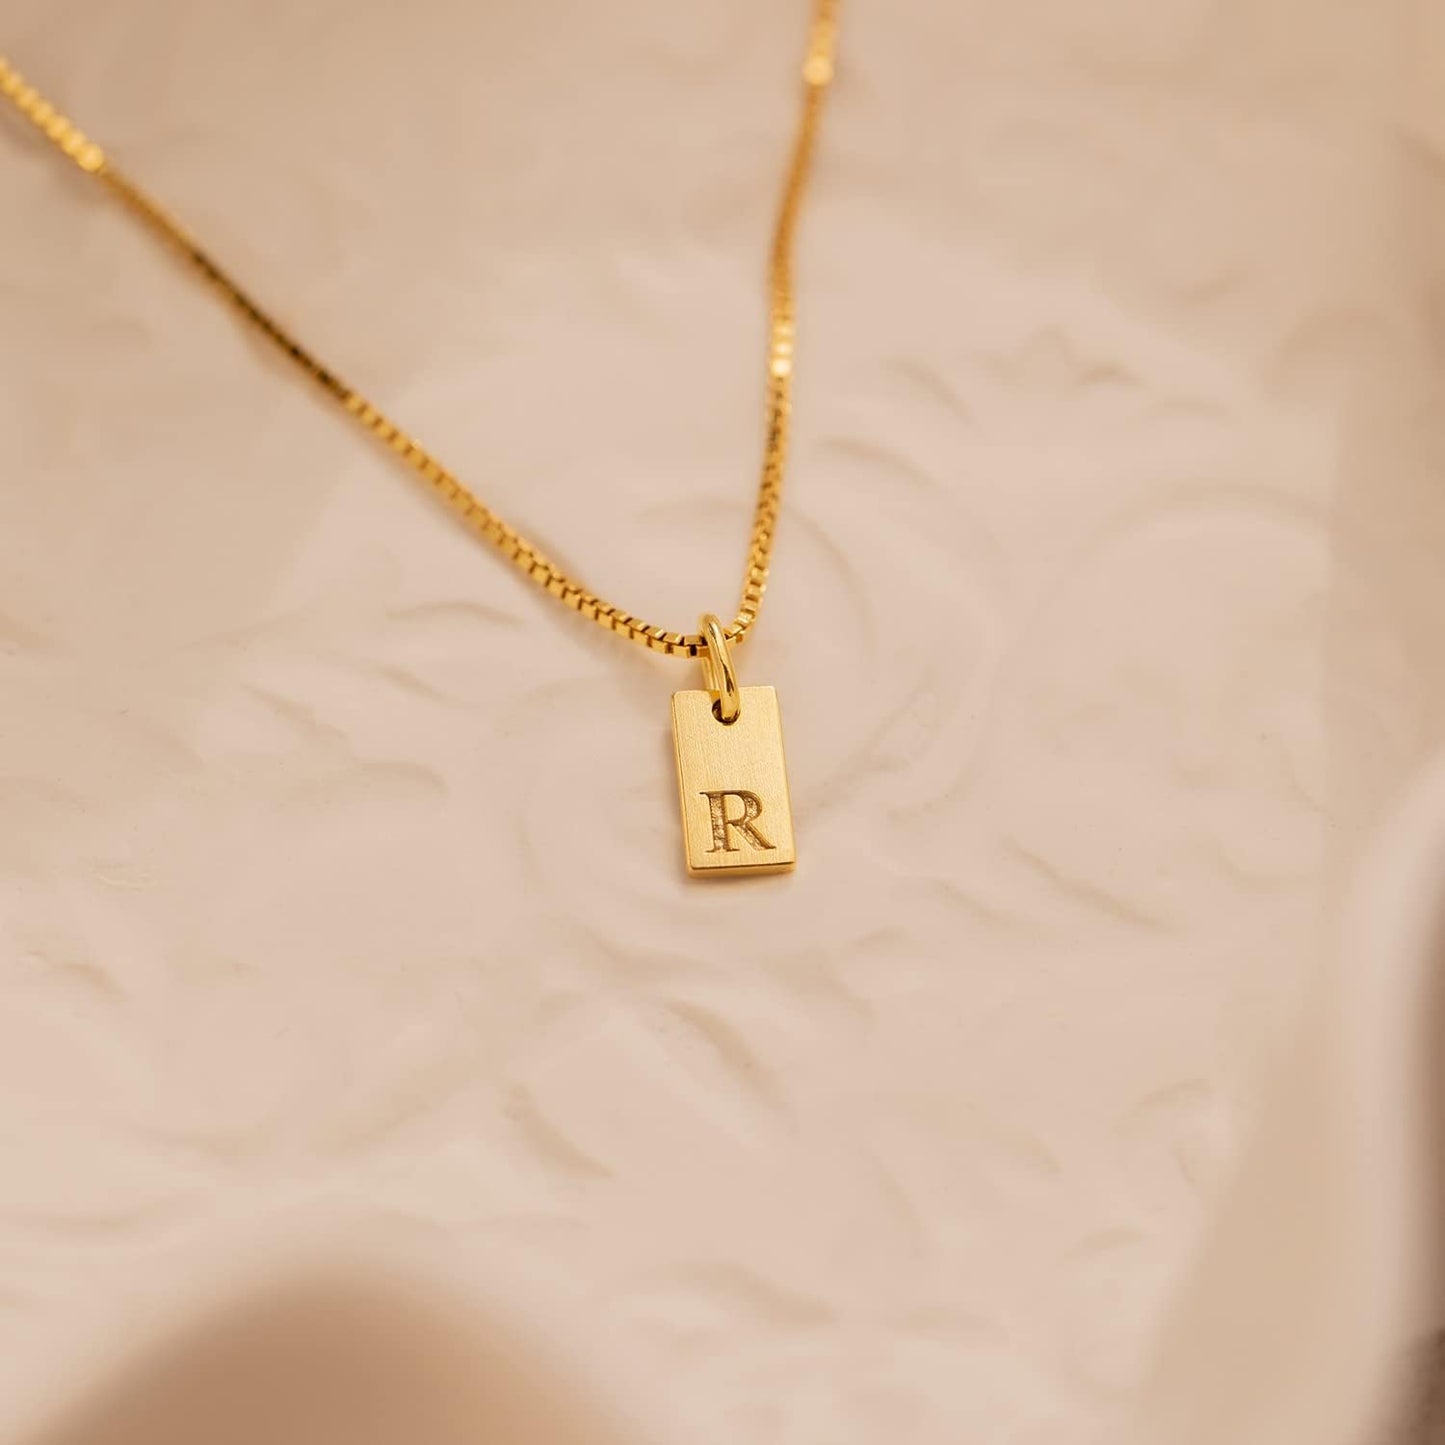 Initial Necklaces for Women 14K Gold Plated Letter Necklace Dainty Gold Name Necklace Personalized Initial Tag Pendant Necklace for Women Trendy Gold Jewelry